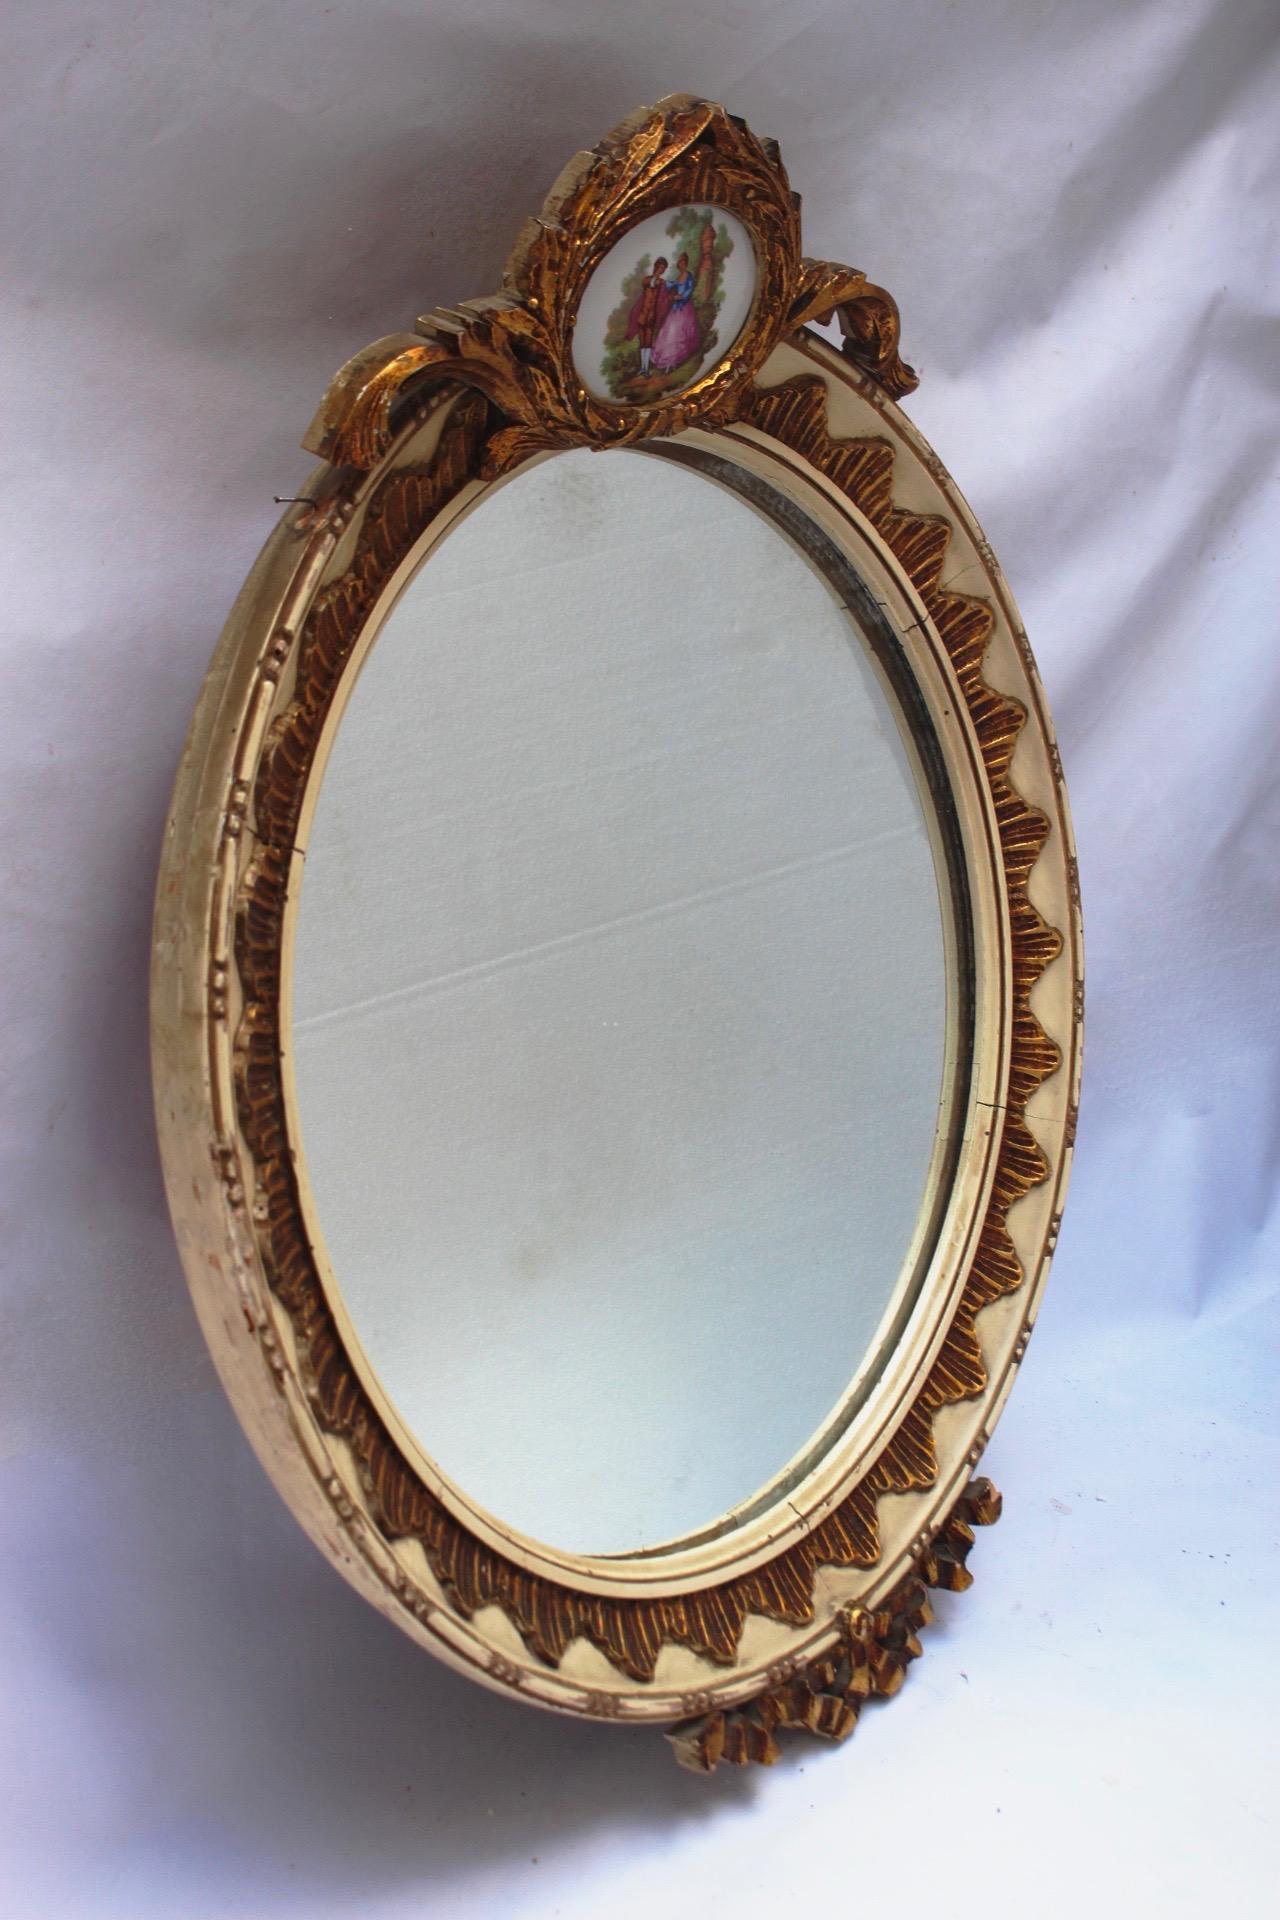 Midcentury neoclassical revival round wood and ceramic wall mirror, made in Spain during the 1950s.
There is a small piece of marquetry missing(Pictured).
The piece remains in distressed condition.